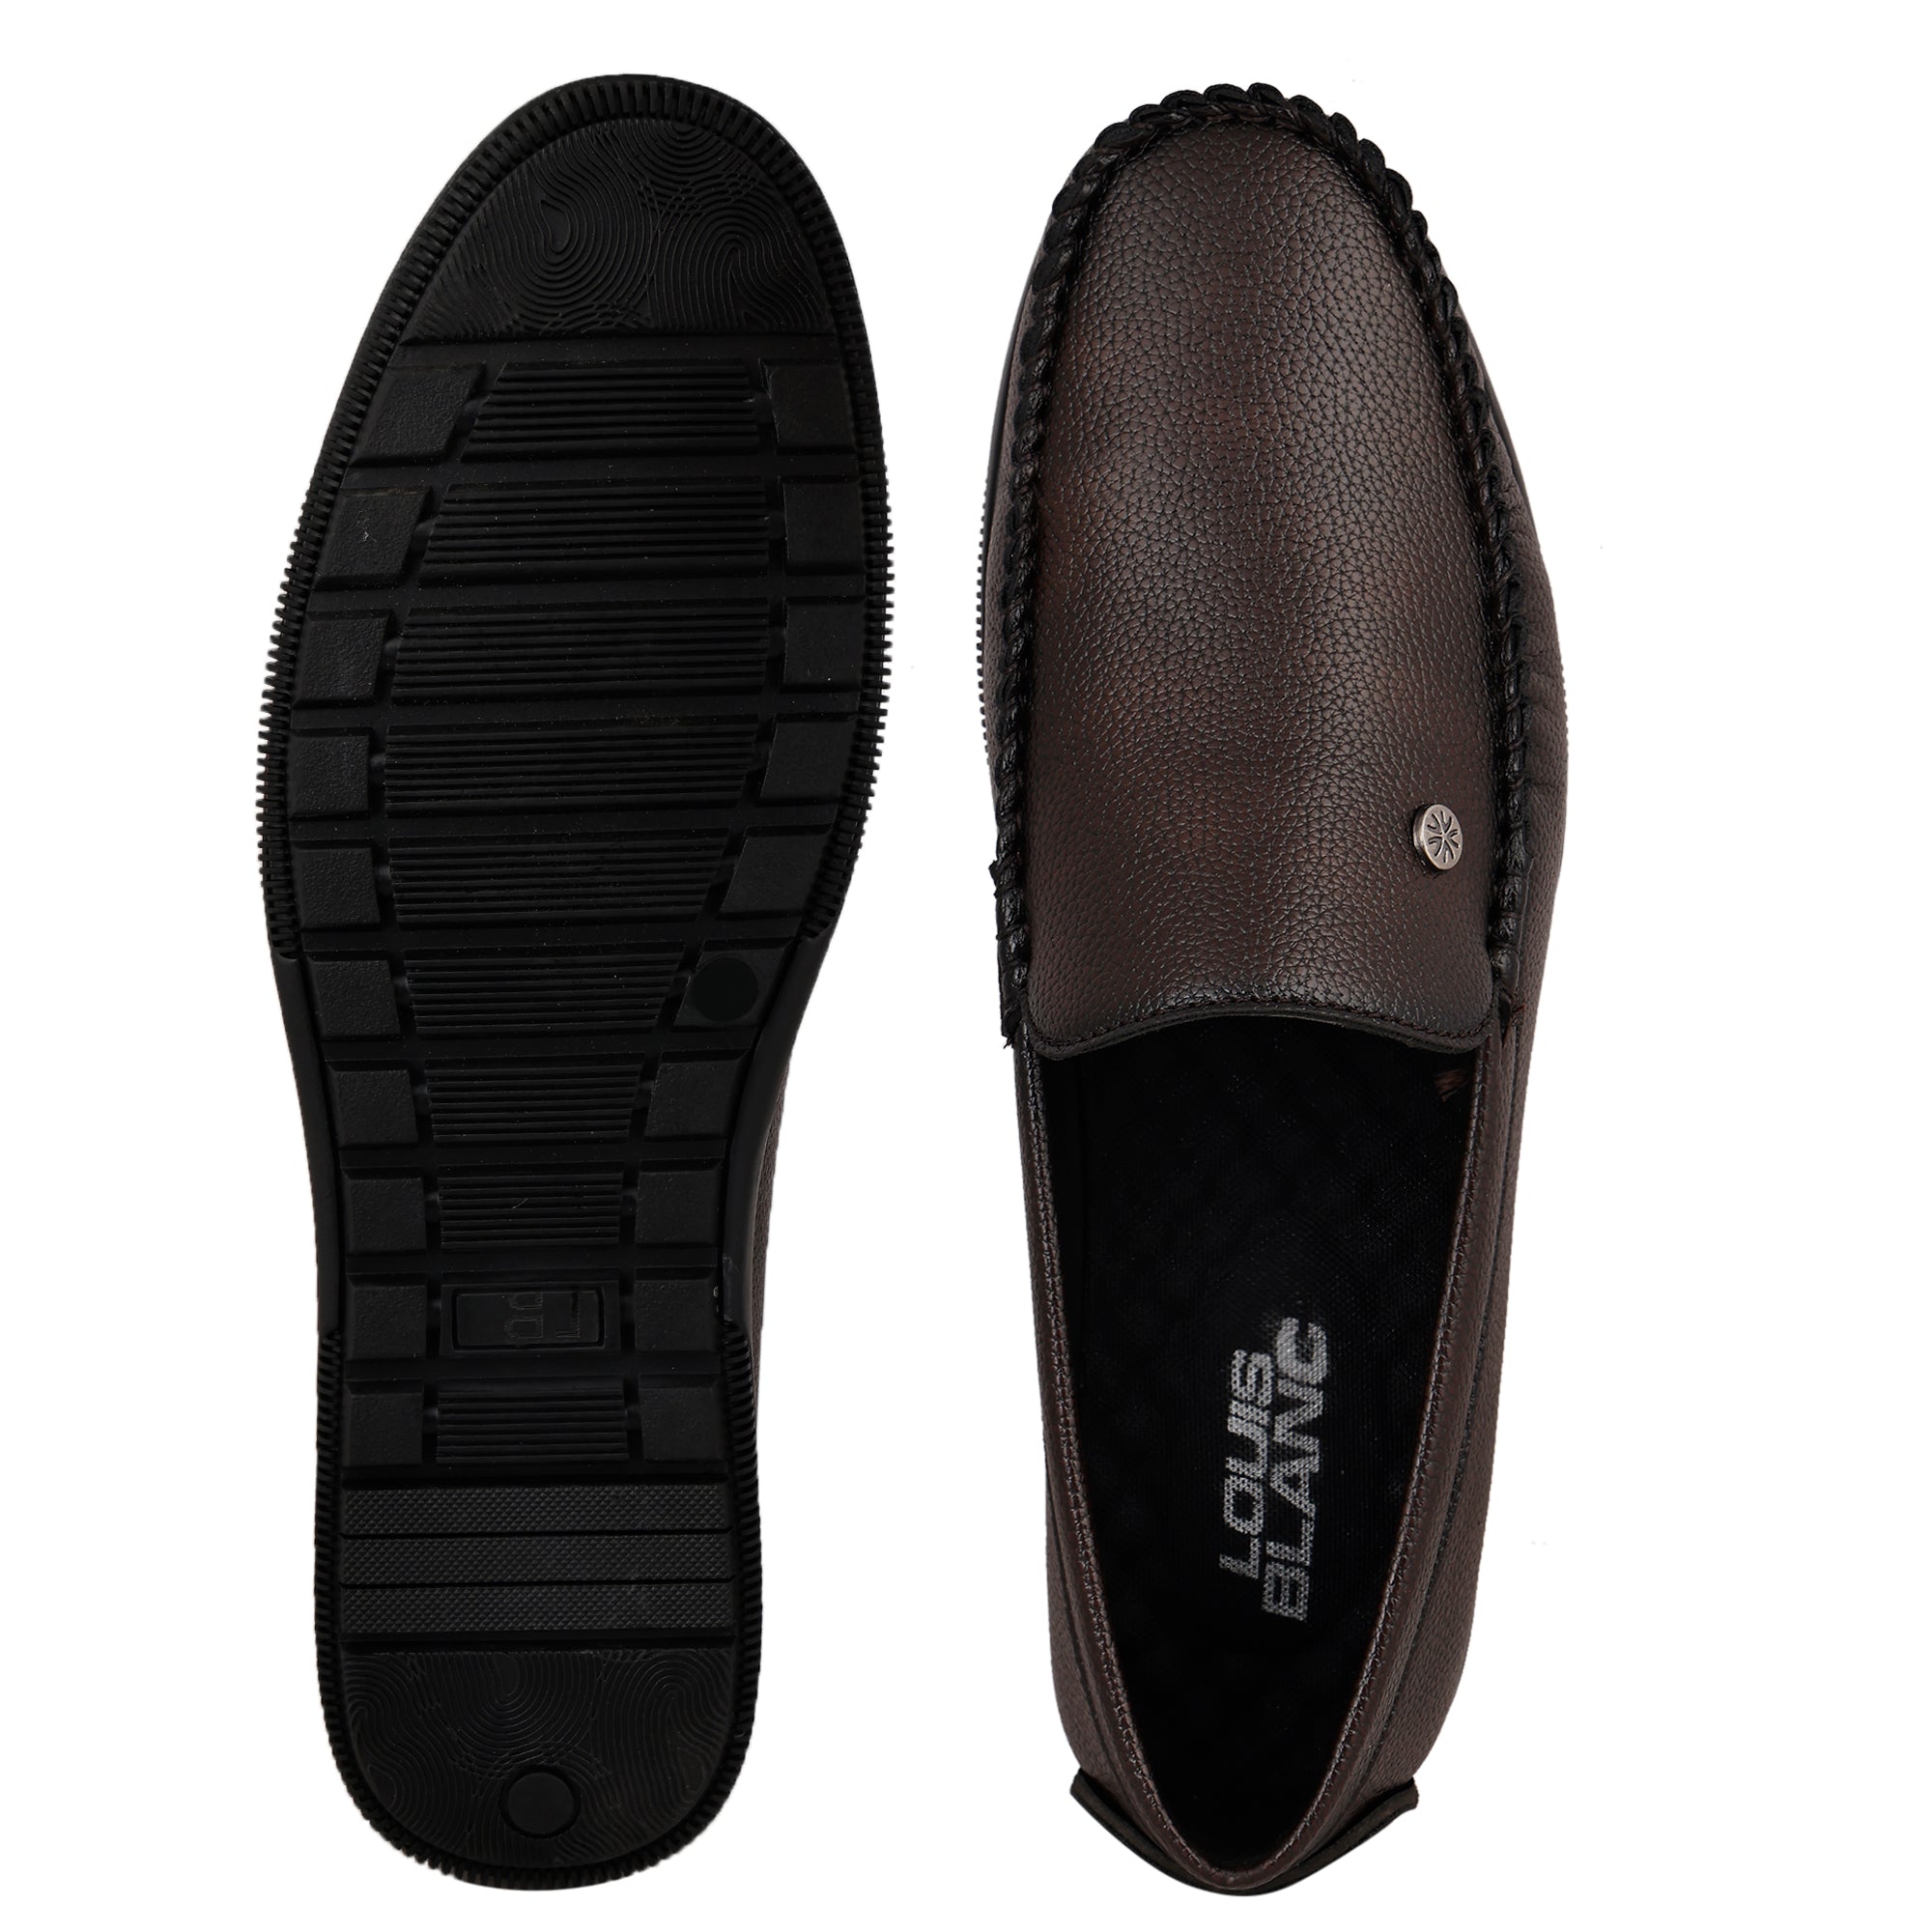 LB 45A Buckle Brunette Brown  Slip On Style Loafer Most Comfortable Doctor Insole With Wrinkle Free Fox Leather Loafers.